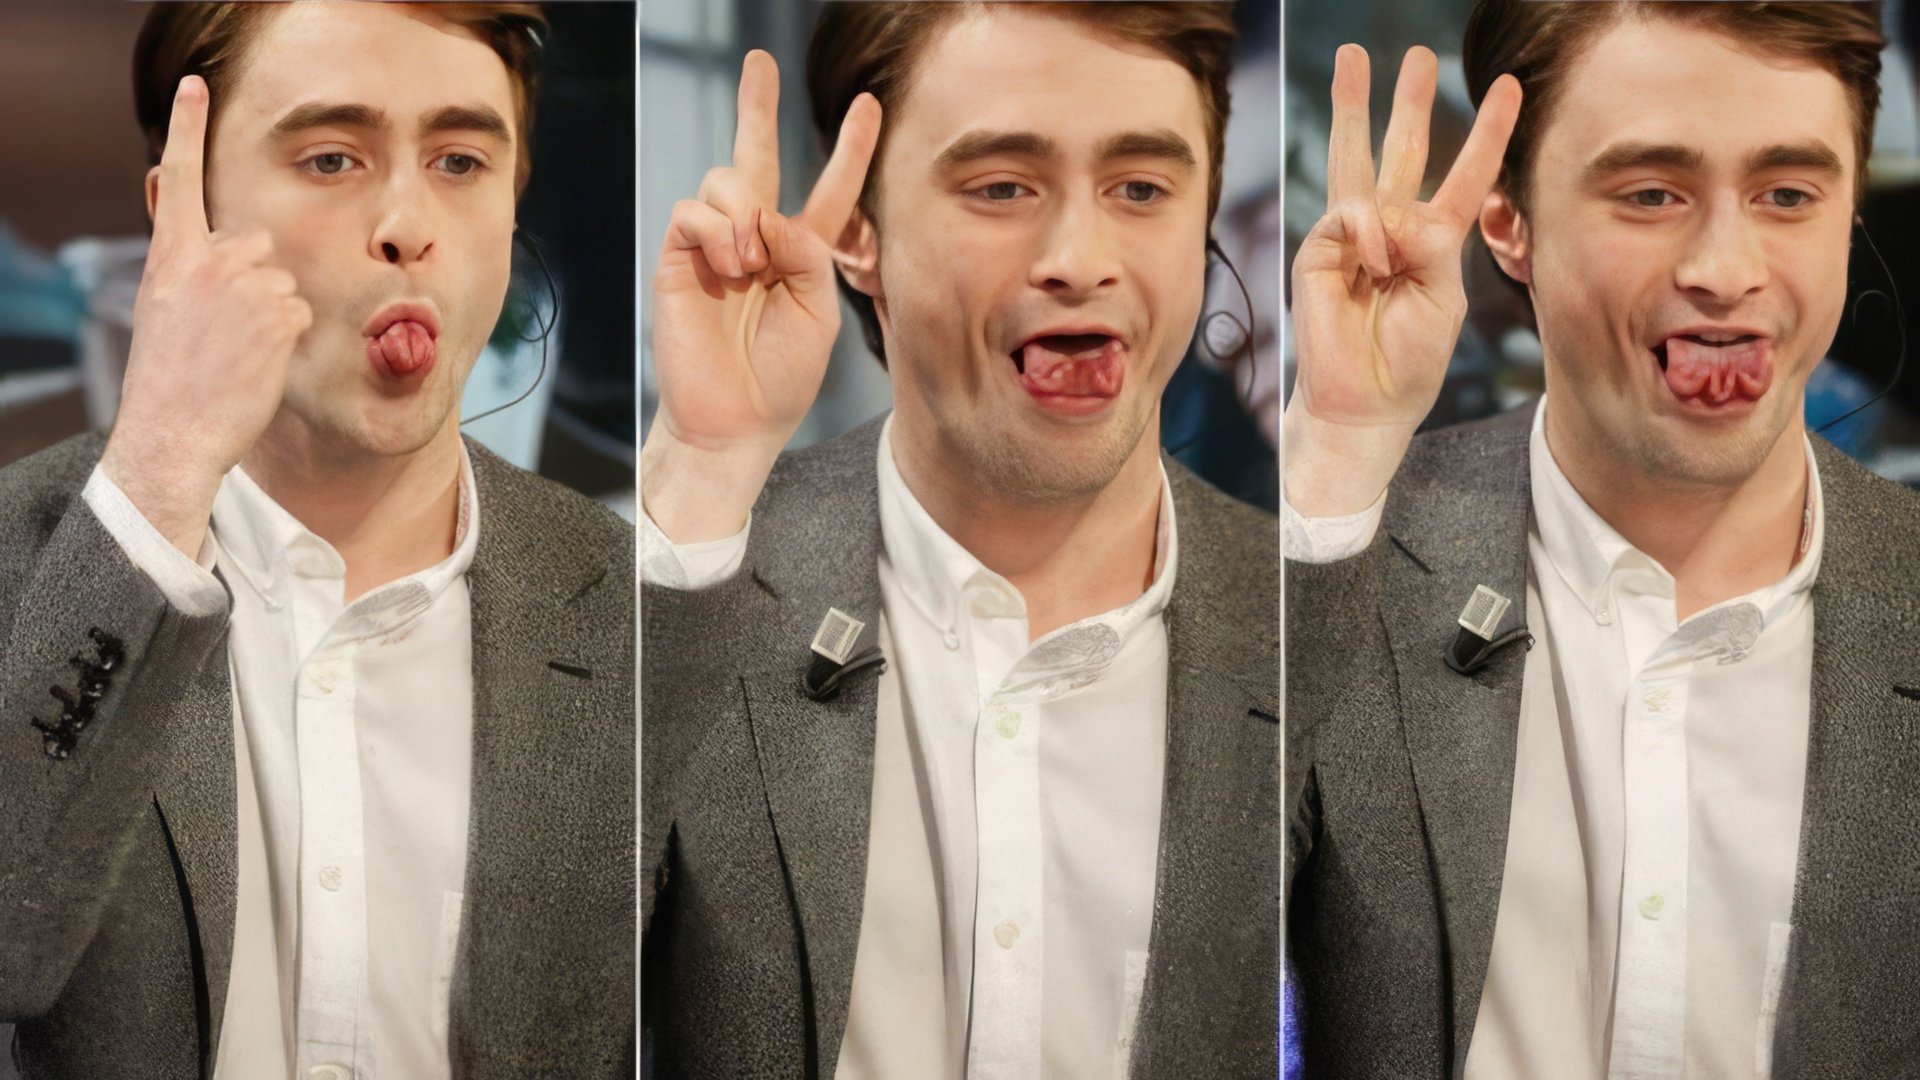 Daniel Radcliffe was one of the most payed actors in 2009